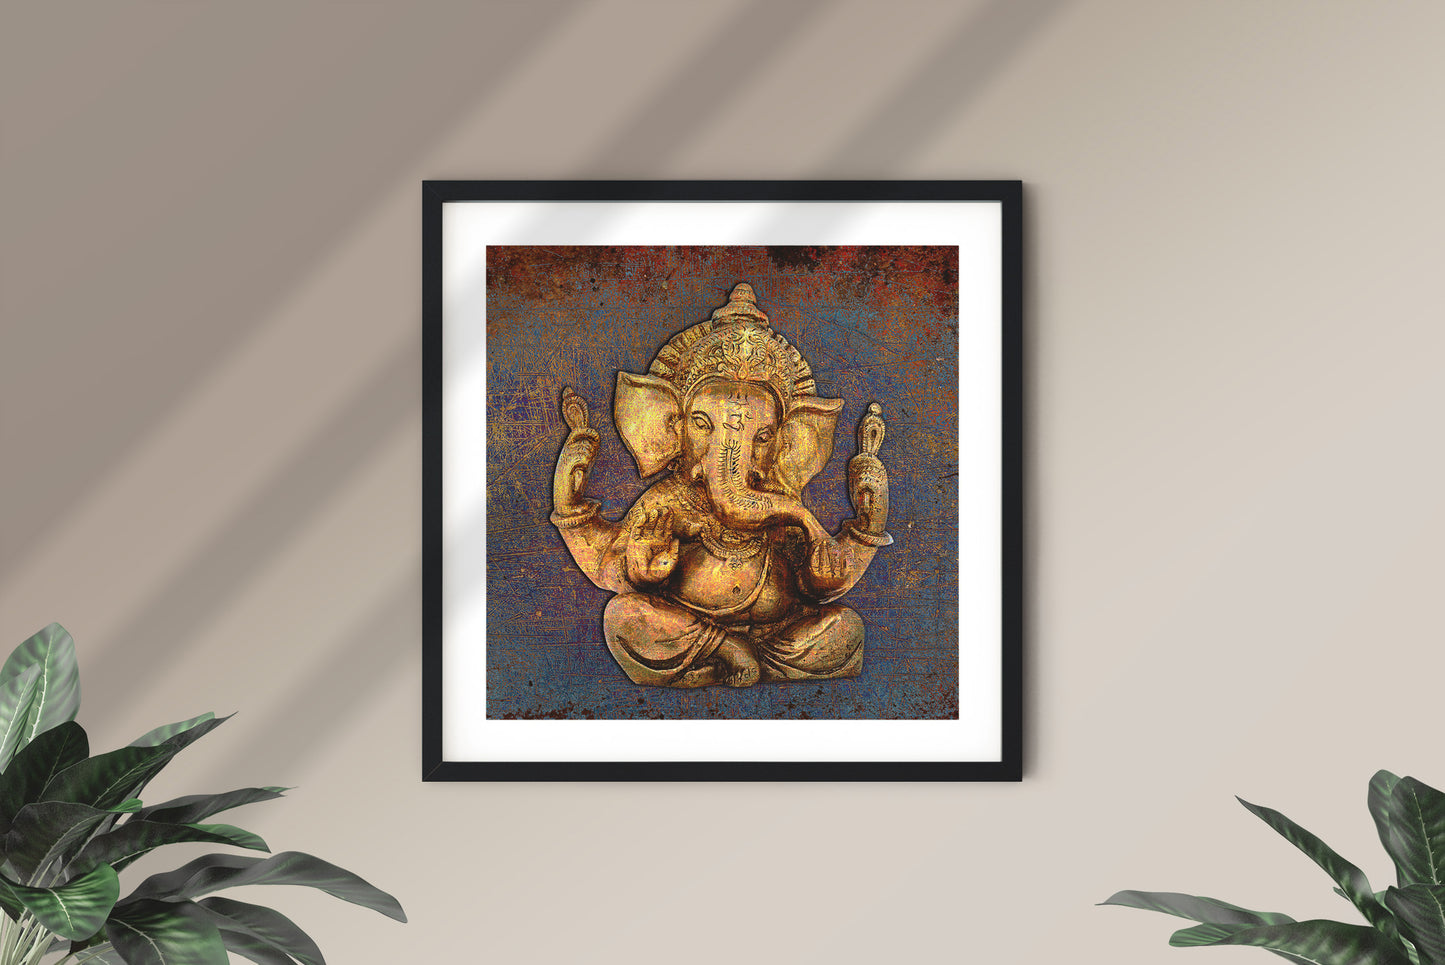 Gold Ganesha on a Distressed Purple and Orange Background Museum-quality Print on Archival Paper framed and hung